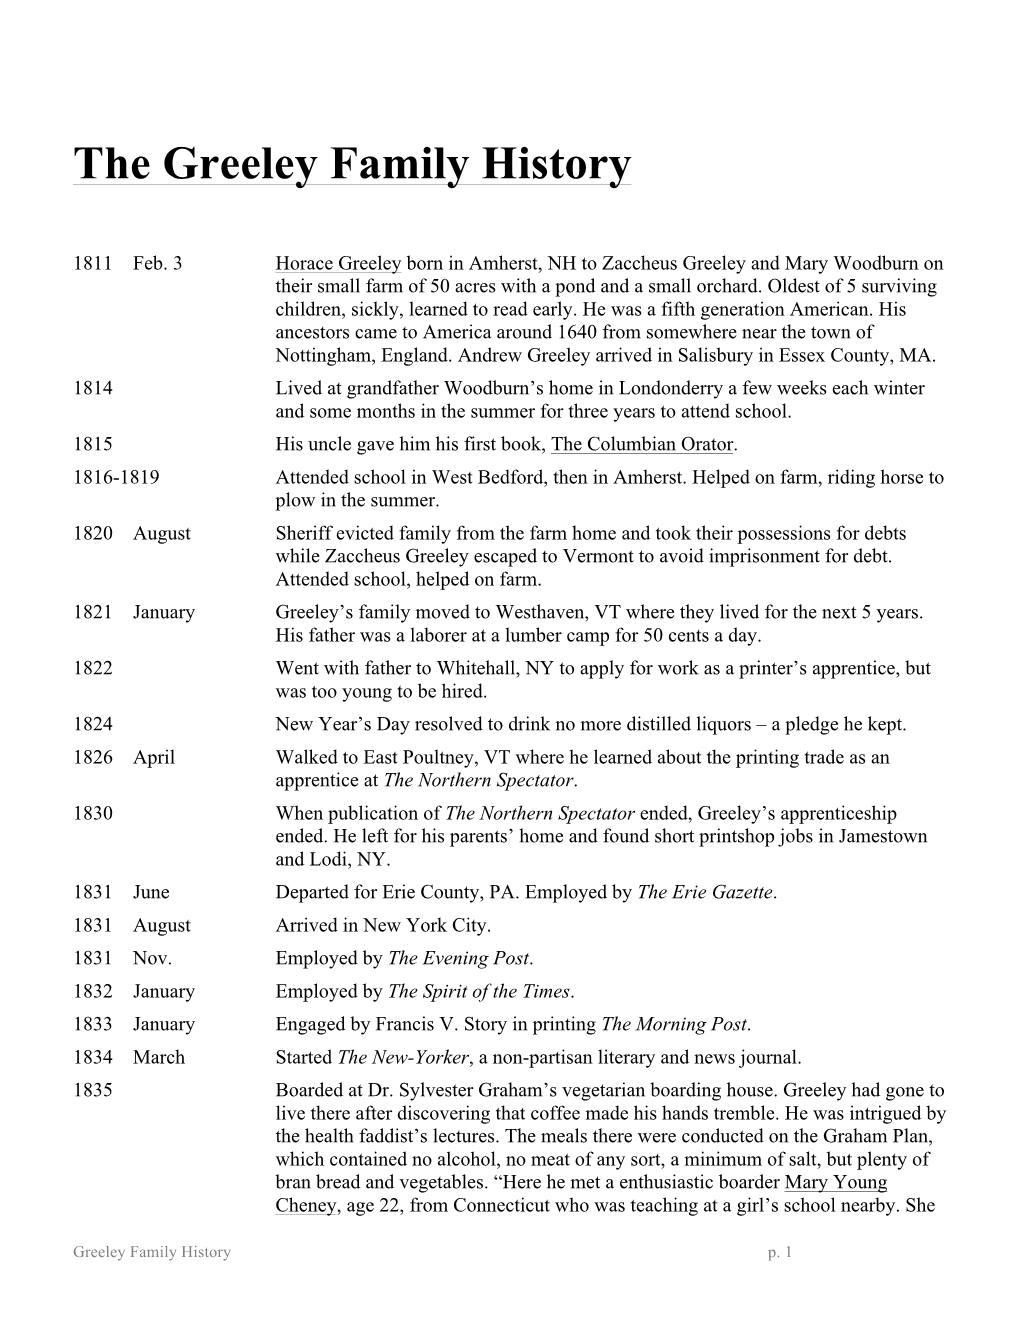 The Greeley Family History Formatted